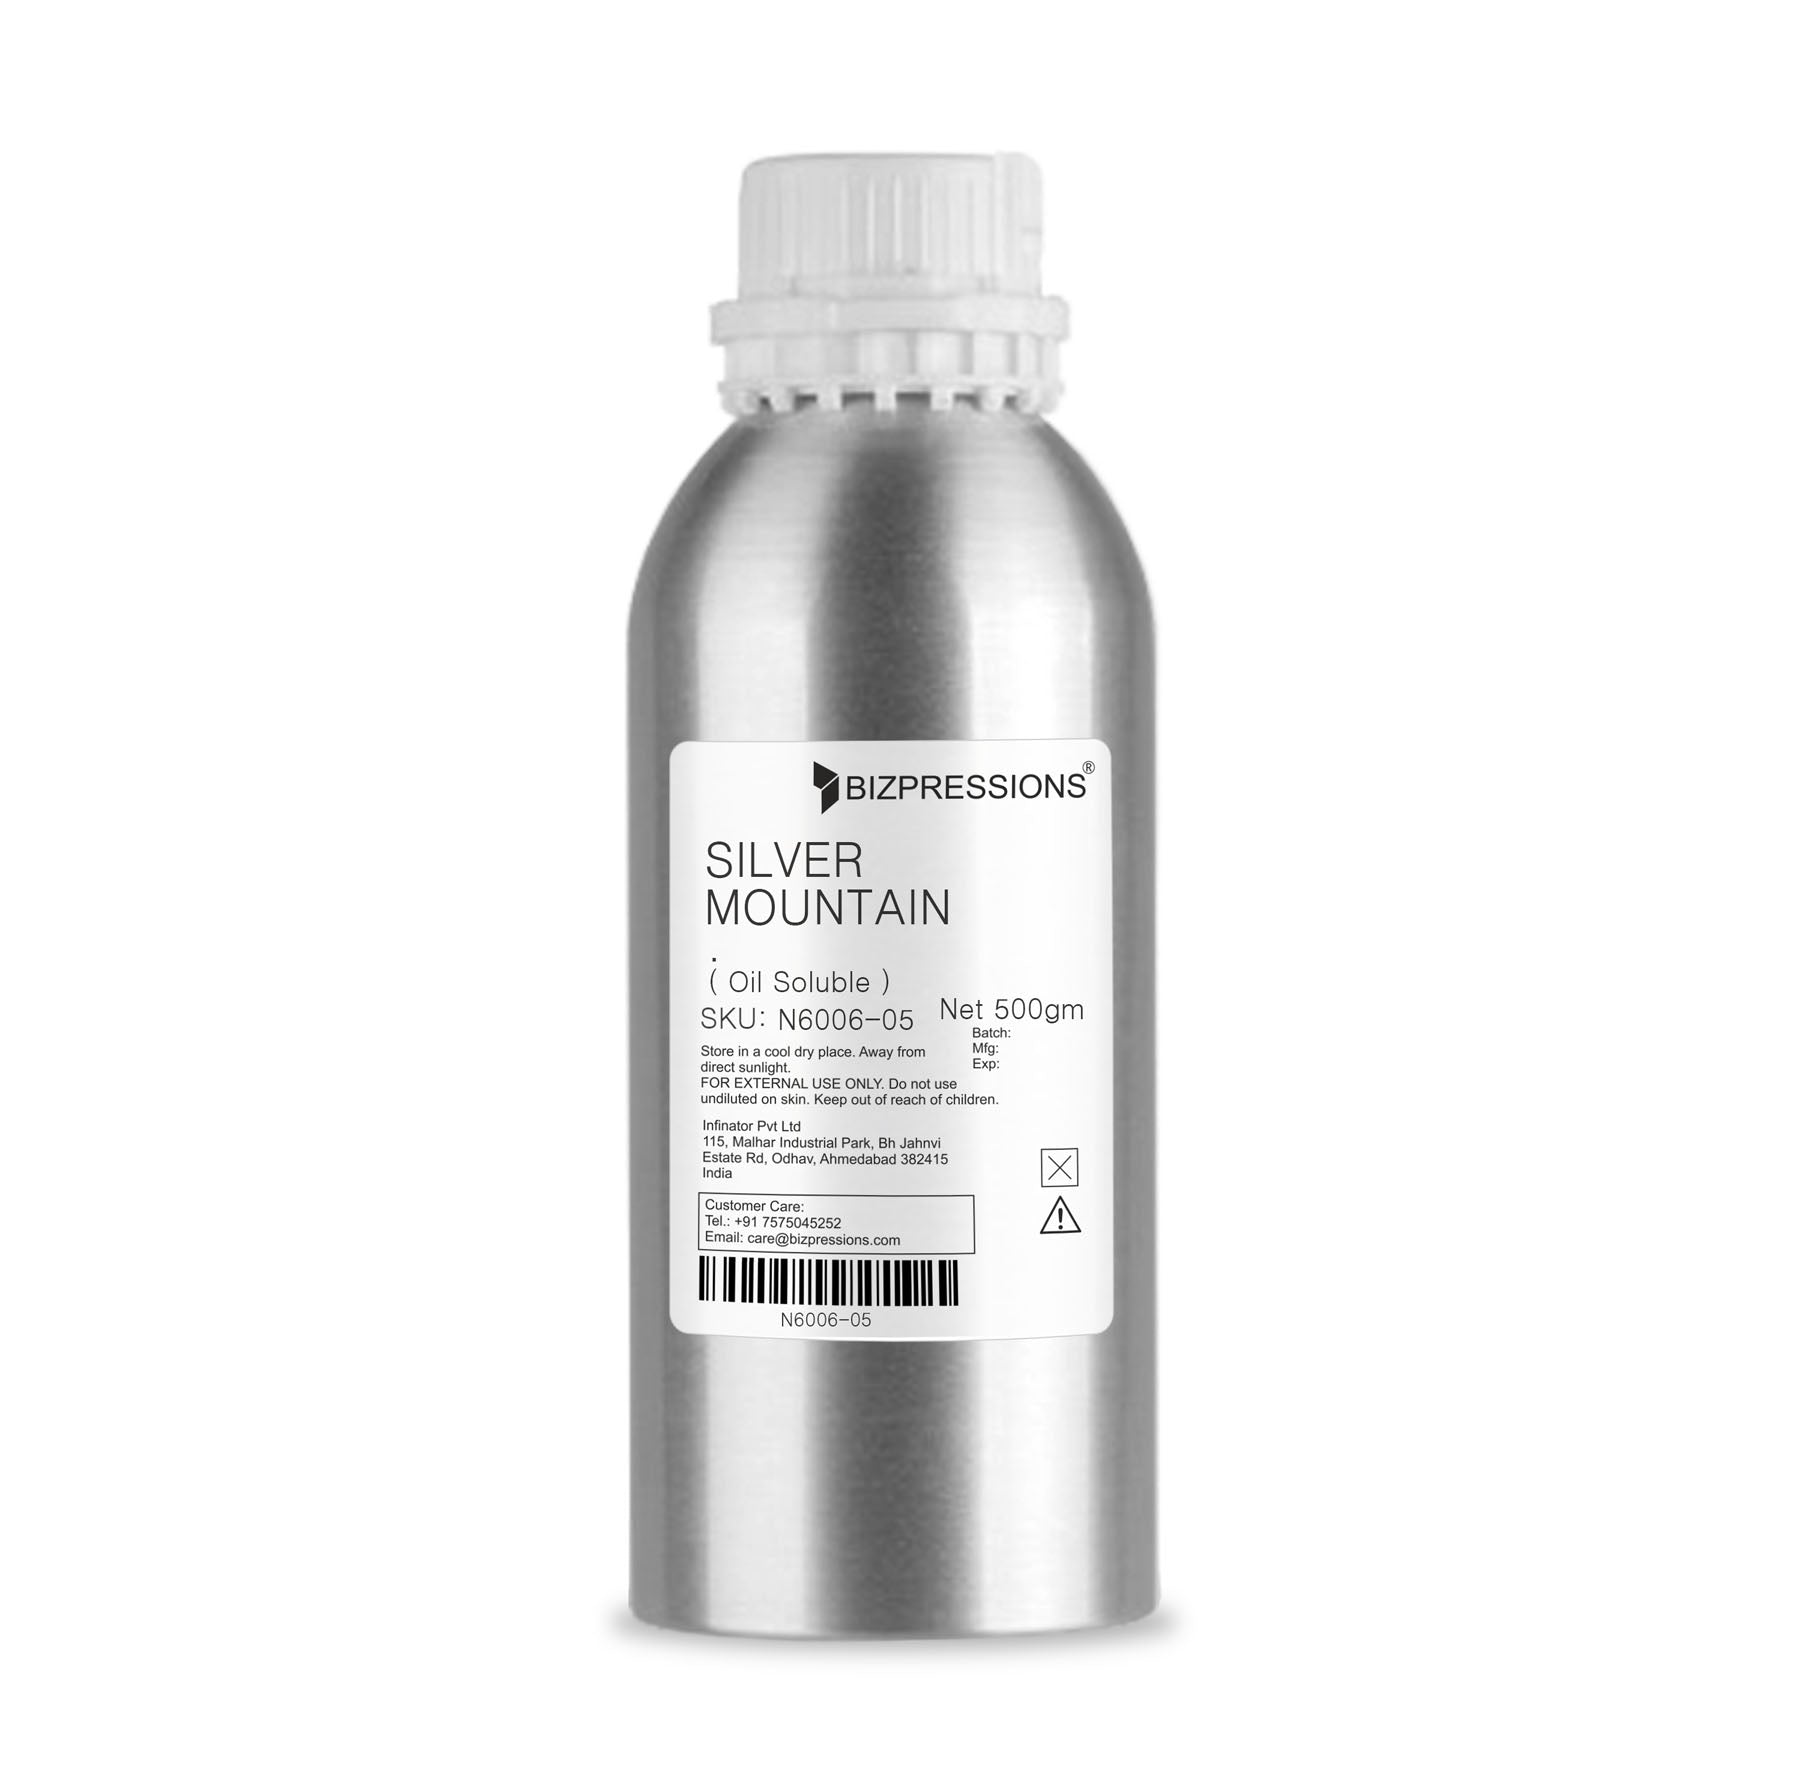 SILVER MOUNTAIN - Fragrance ( Oil Soluble ) - 500 gm